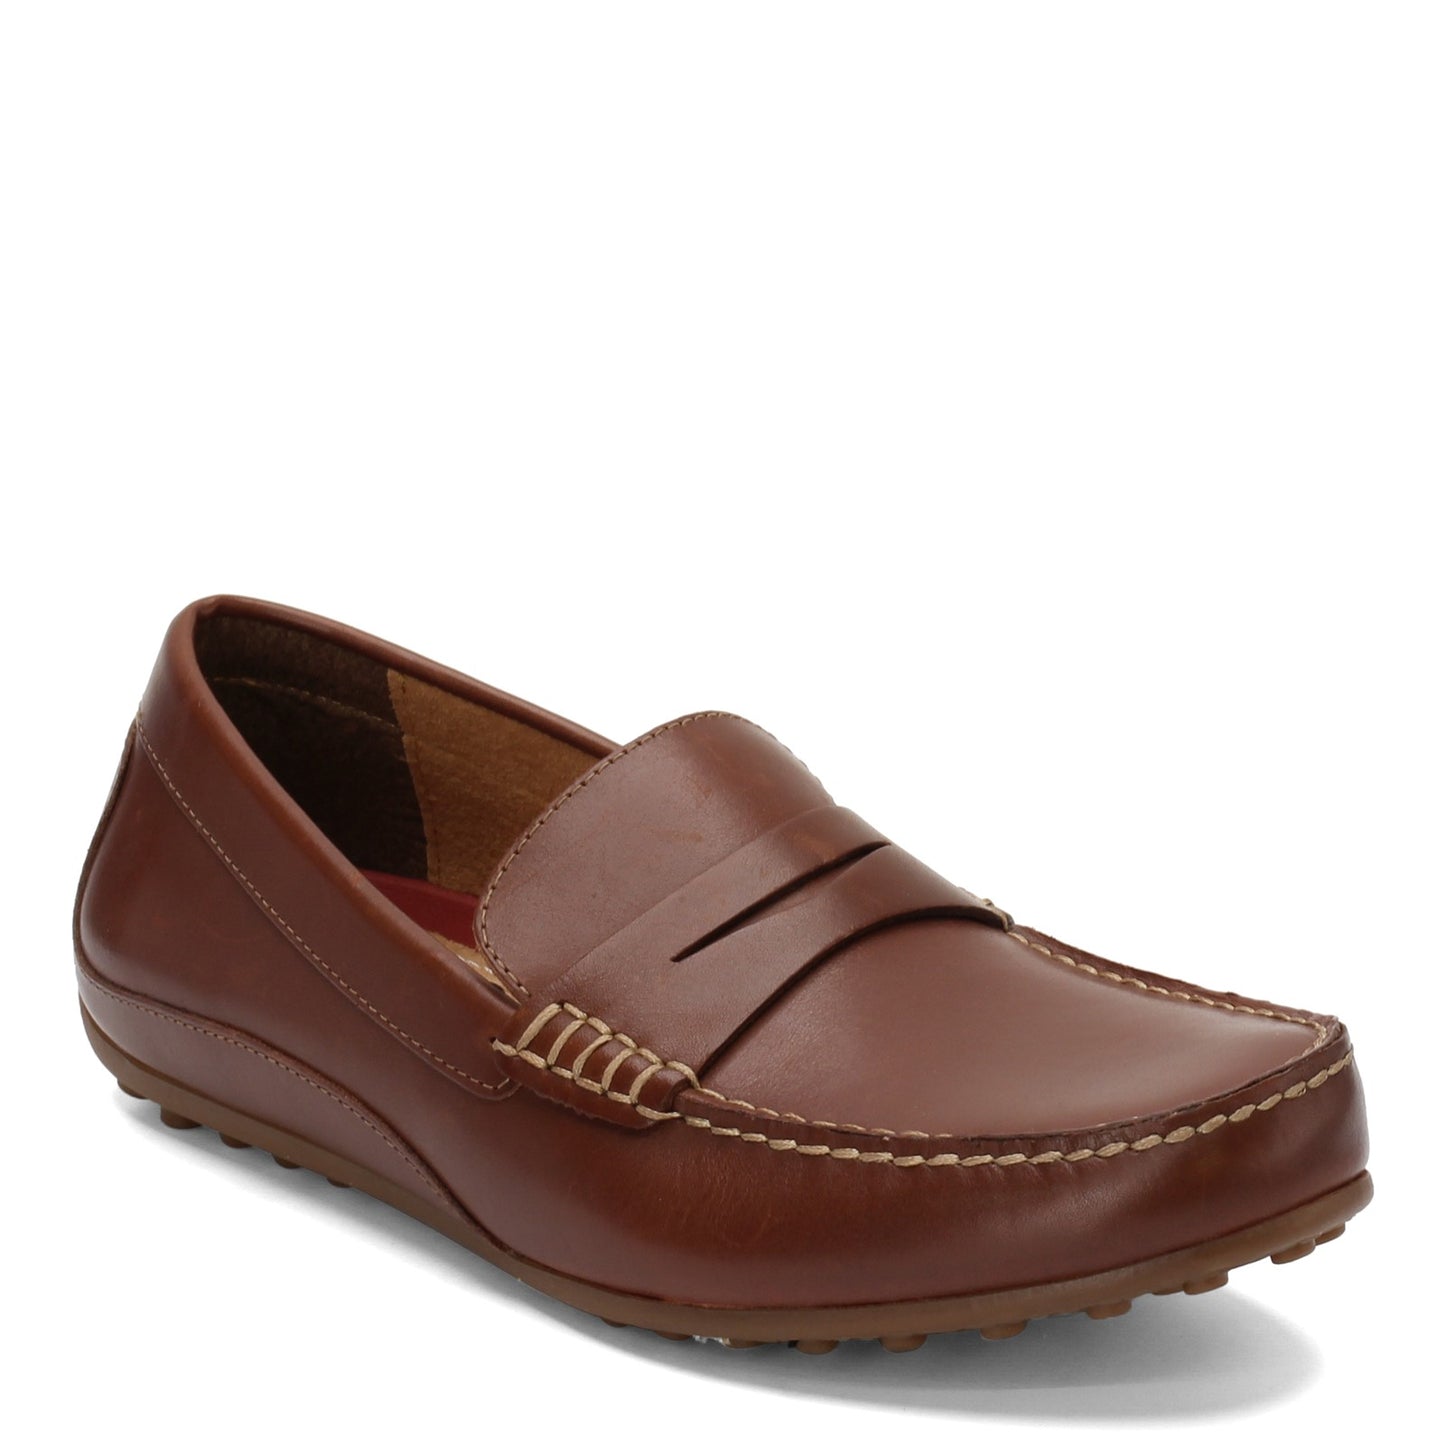 Men's Florsheim, Oval Moc Toe Penny Drivers. This driving moc is perfect for your casual looks. Leather uppers with smooth leather linings Slip on style for an easy on and off Memory foam cushioned footbed for added comfort Manmade outsole